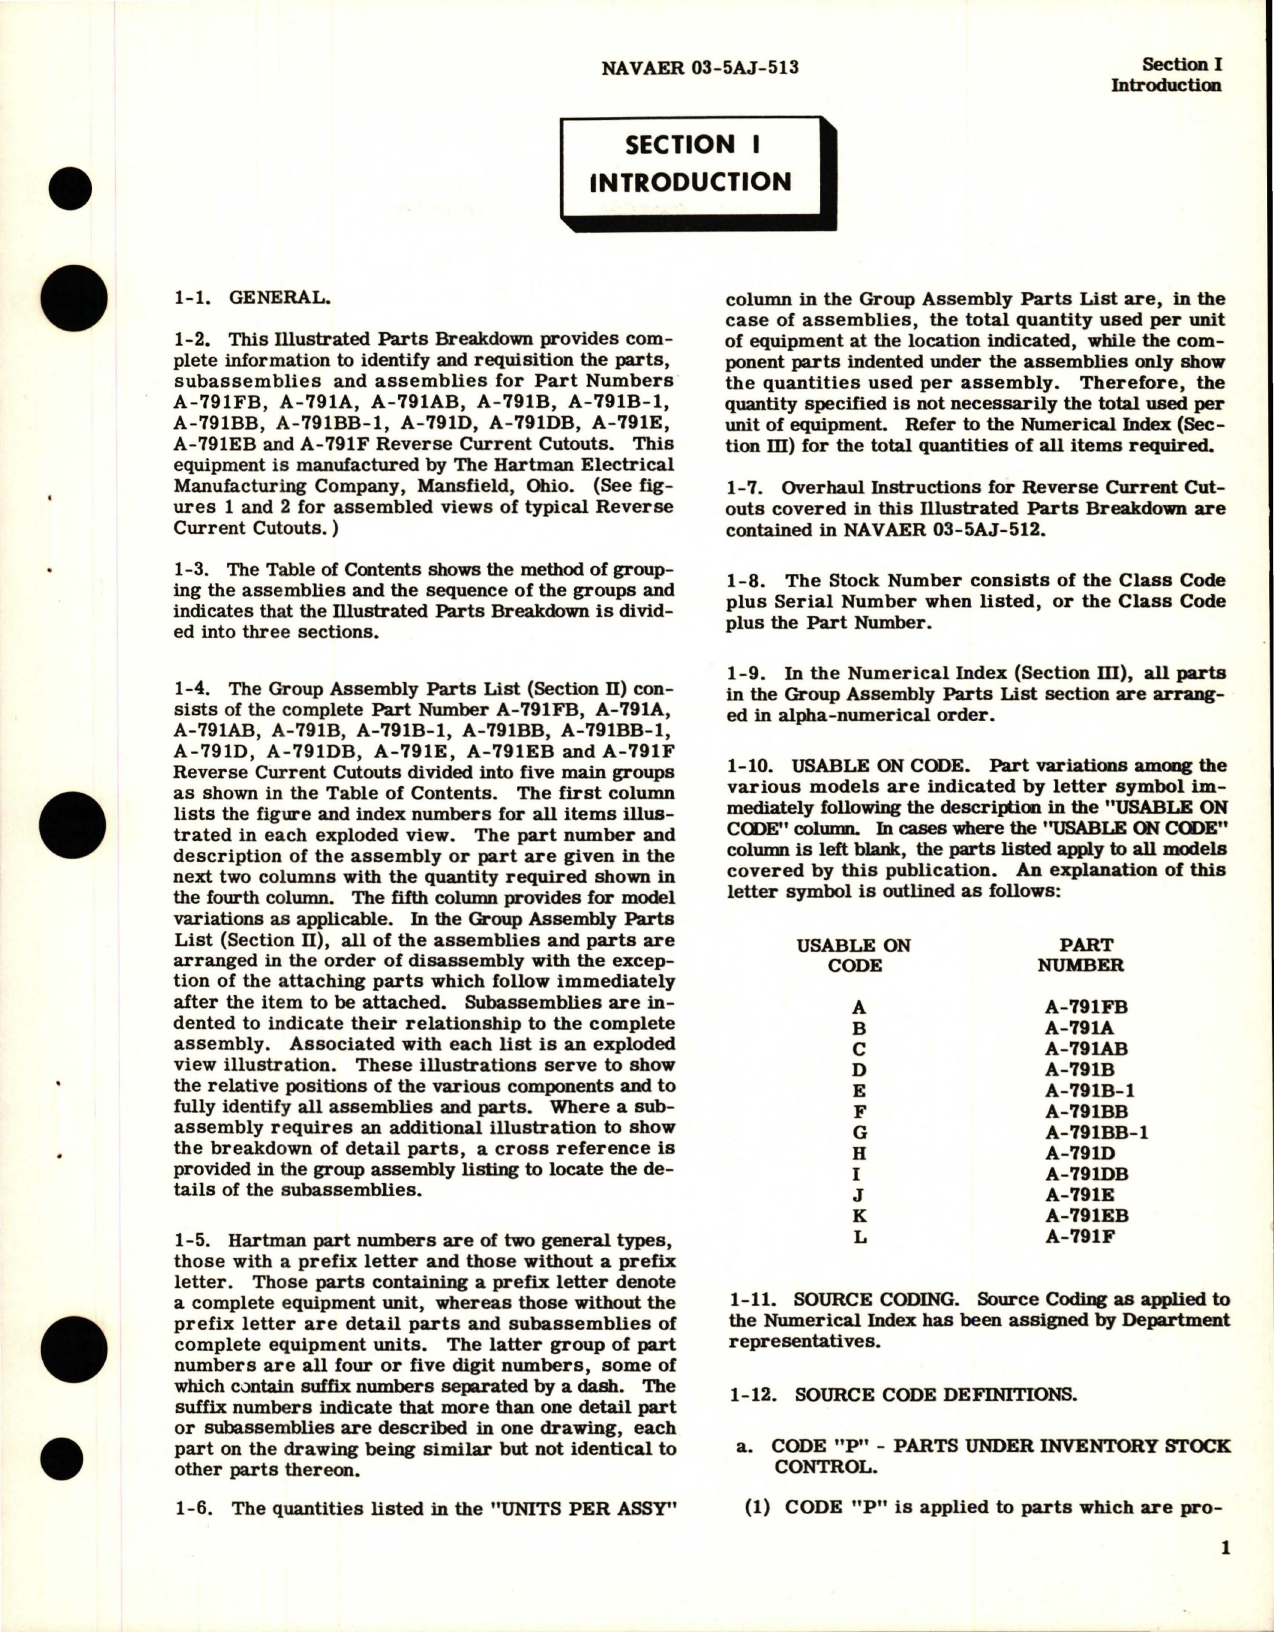 Sample page 5 from AirCorps Library document: Illustrated Parts Breakdown for Reverse Current Cutout 